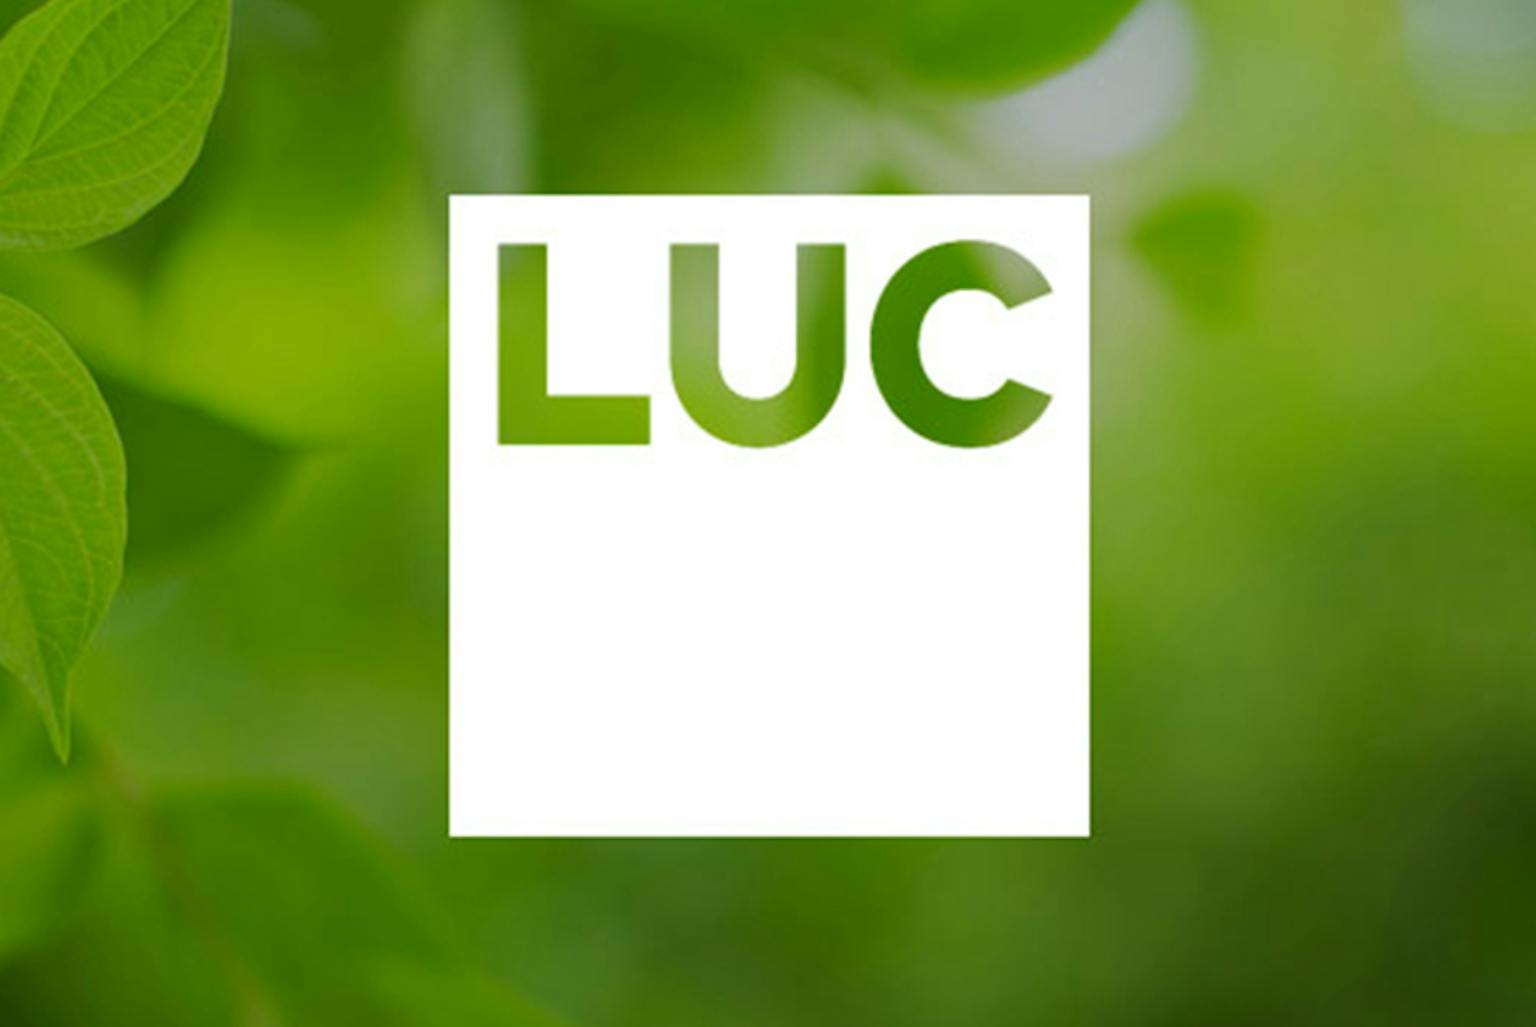 Solid results for LUC in the run up to its 50th anniversary year